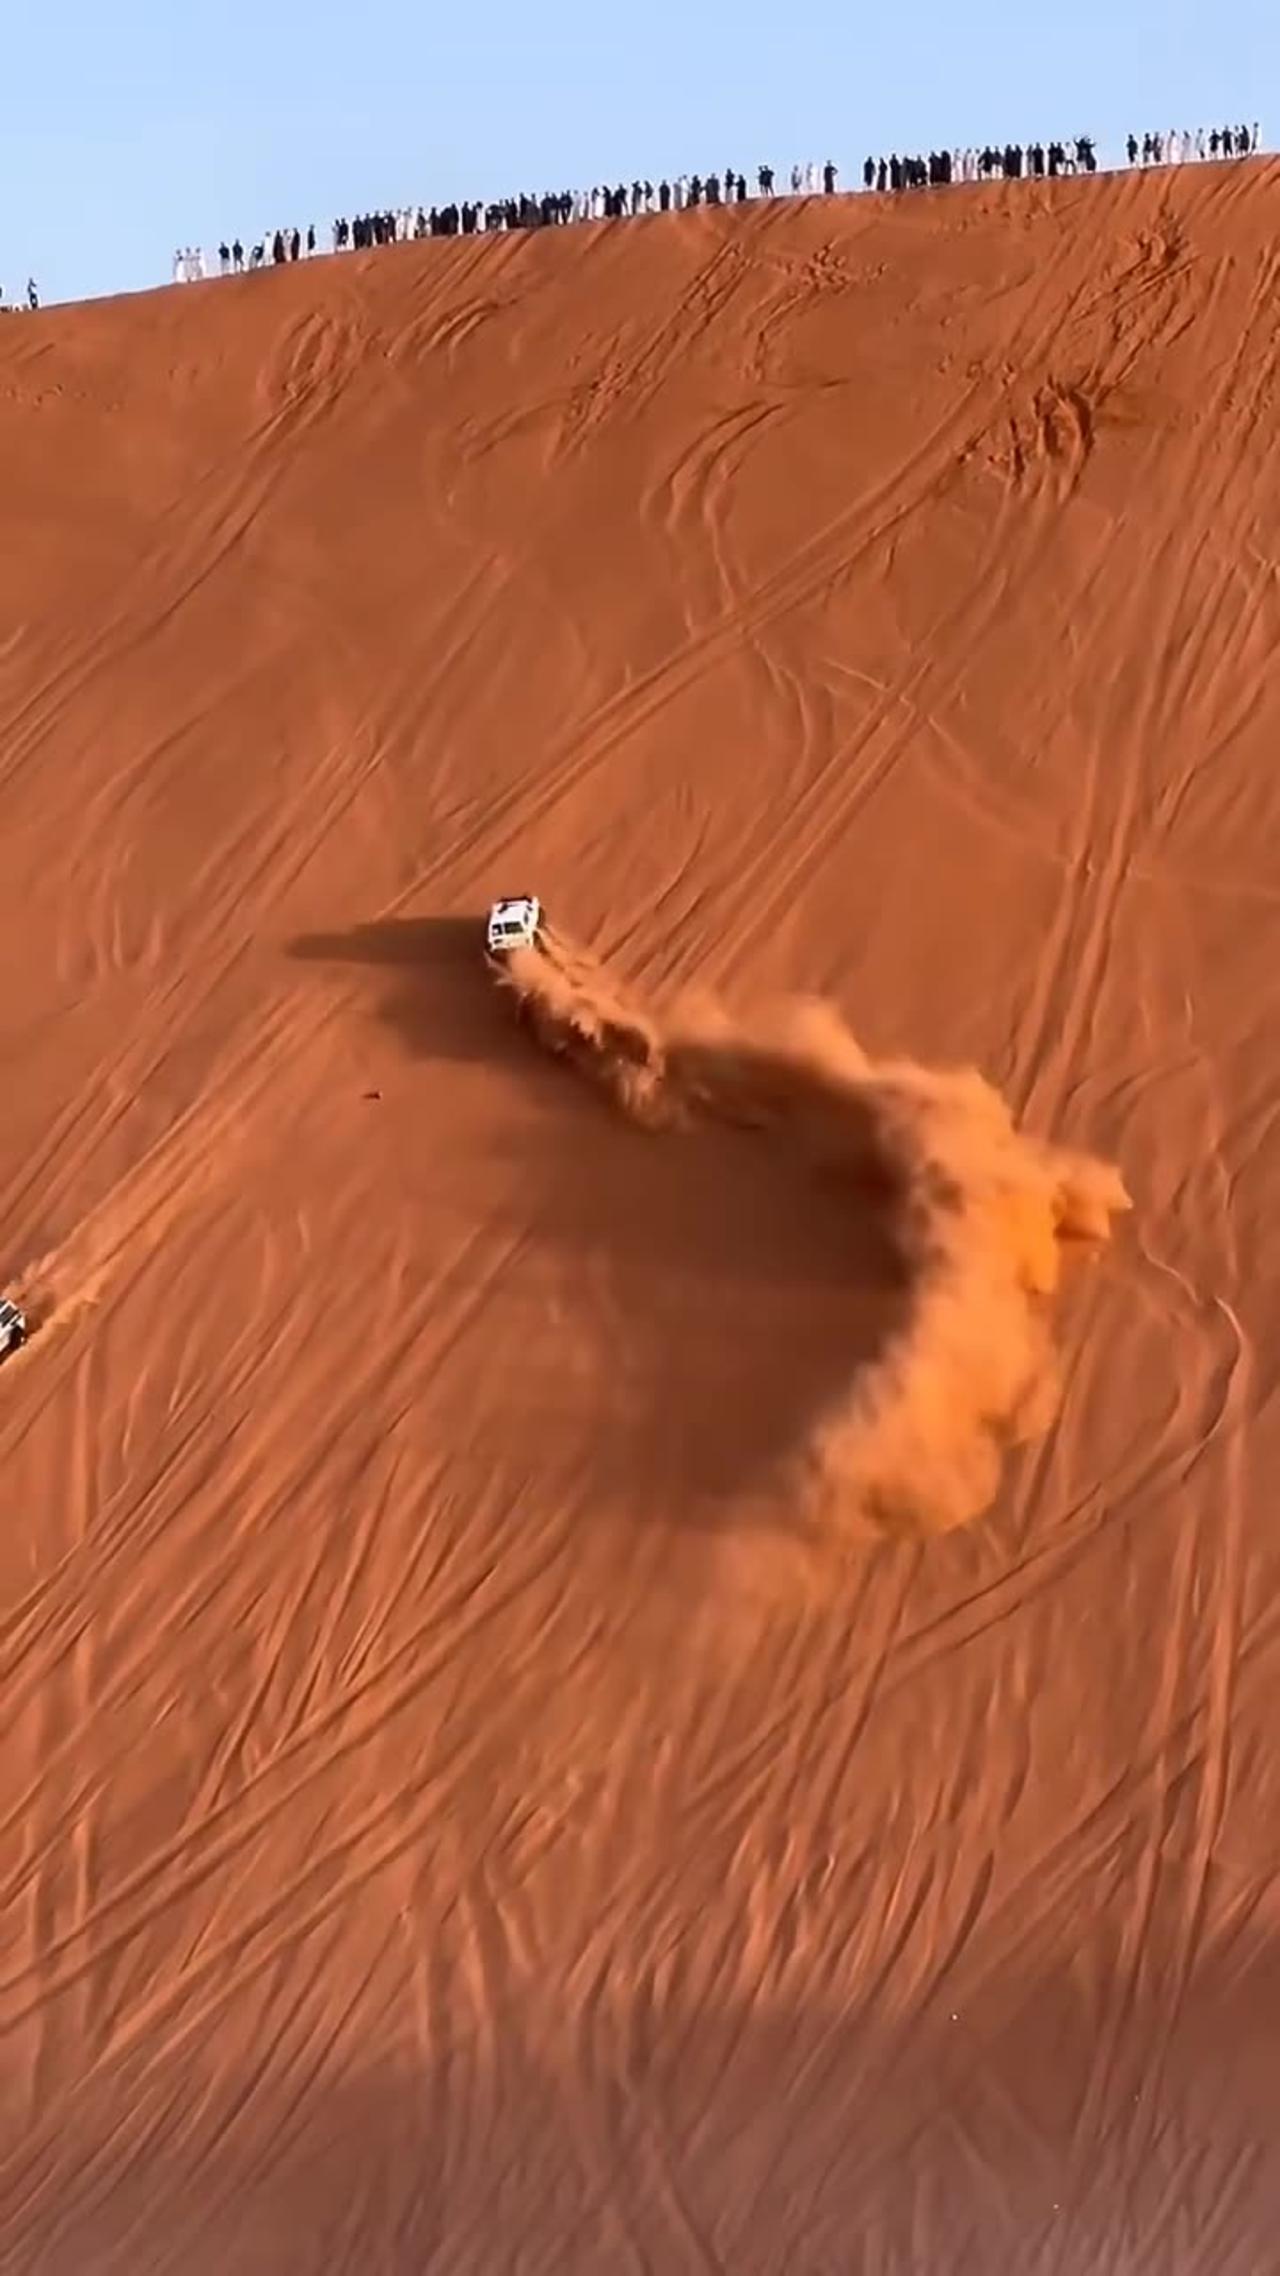 Crazy #Speed #Driving Up a steep Dune!